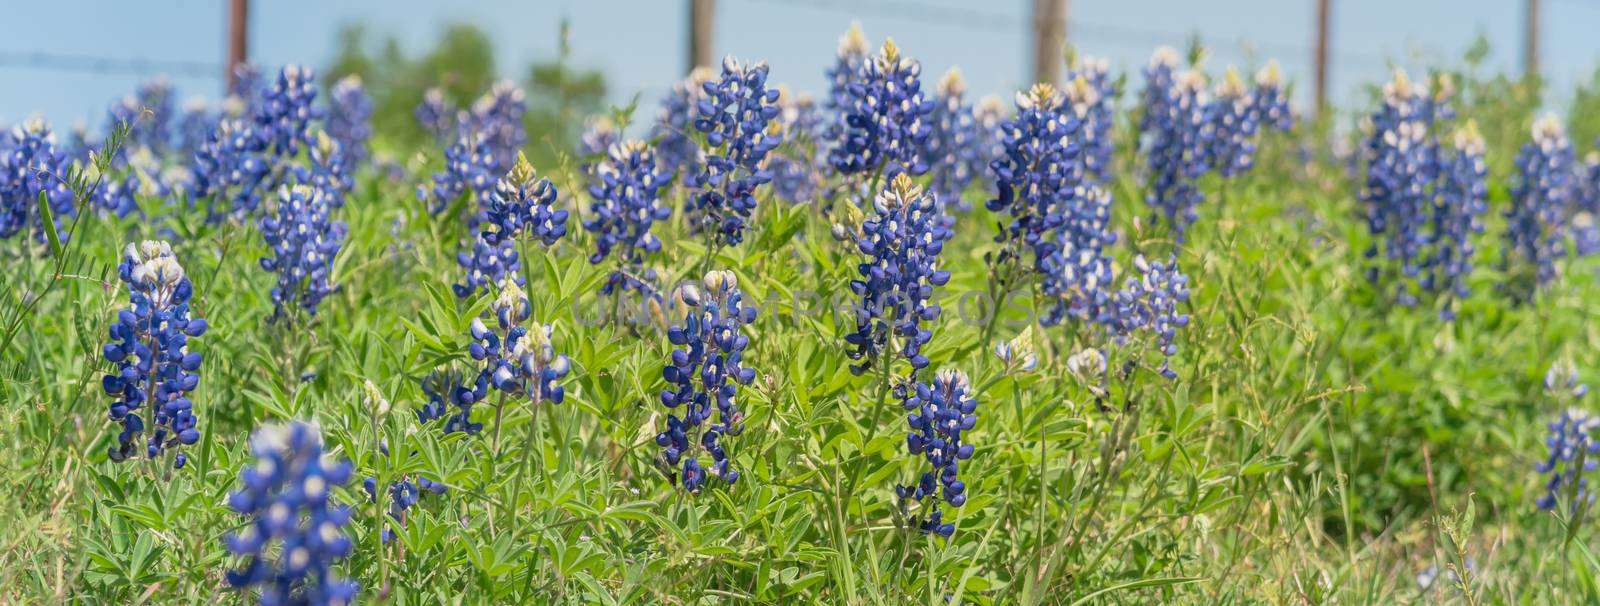 Panoramic view bluebonnet wildflower blooming with barbed wire f by trongnguyen